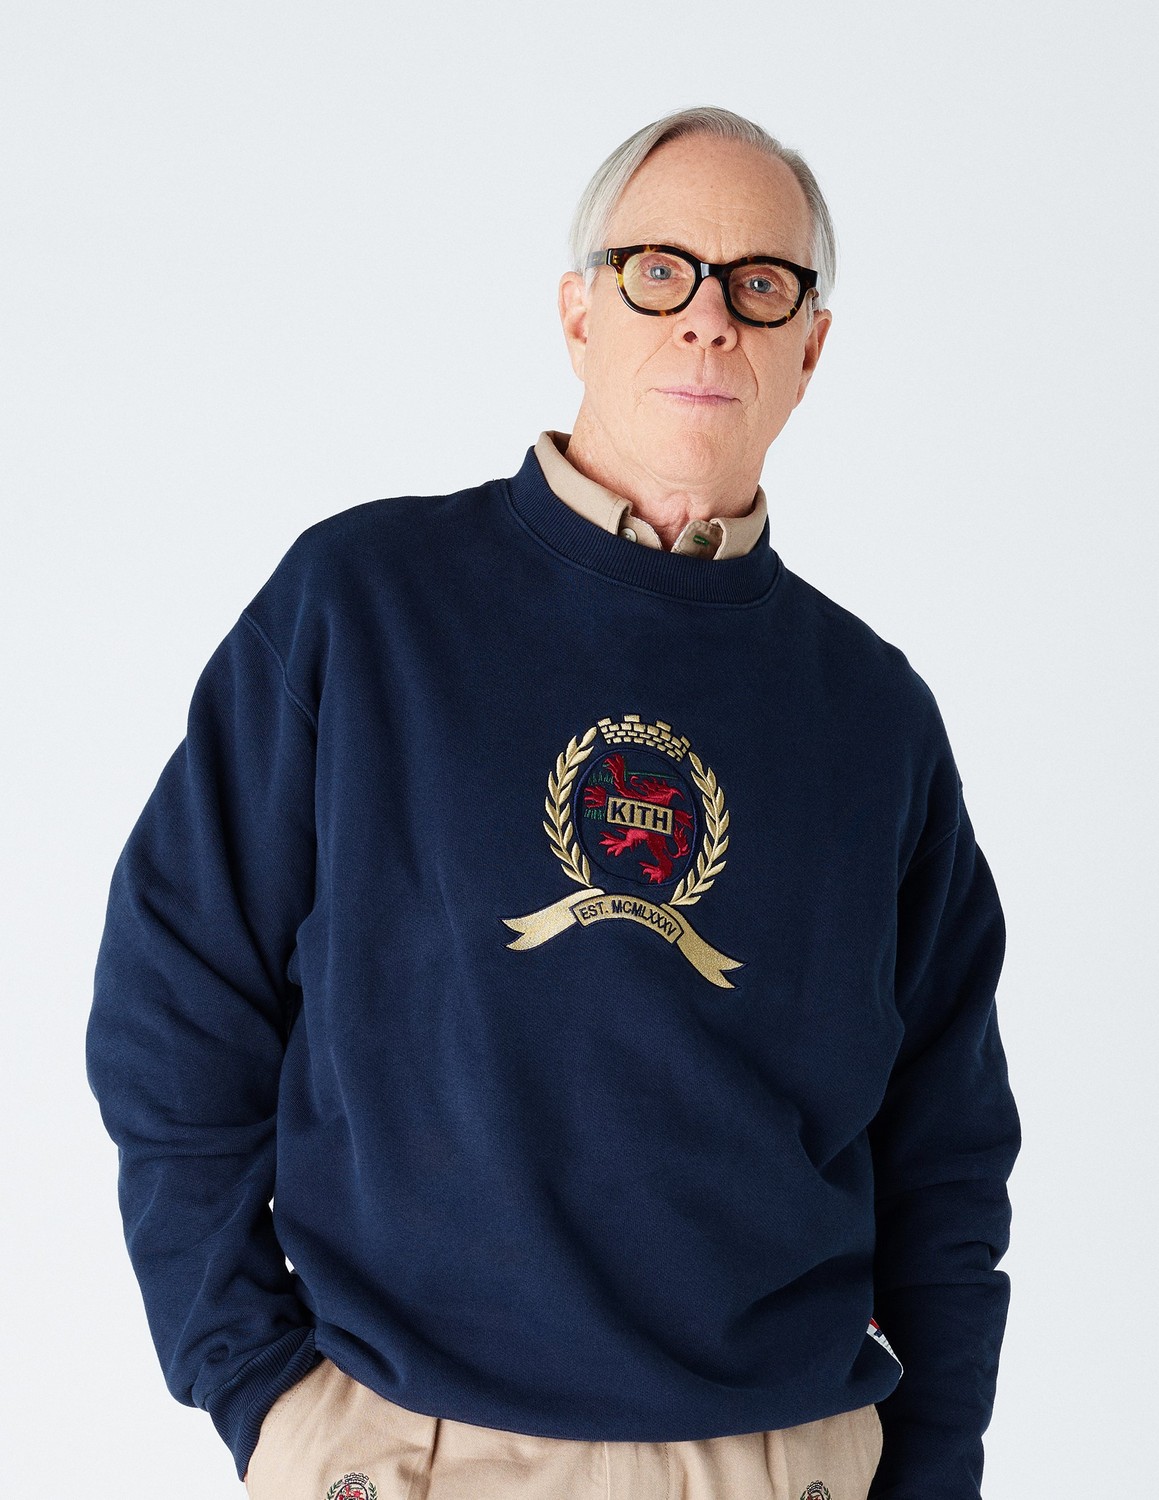 kith tommy hilfiger sweater